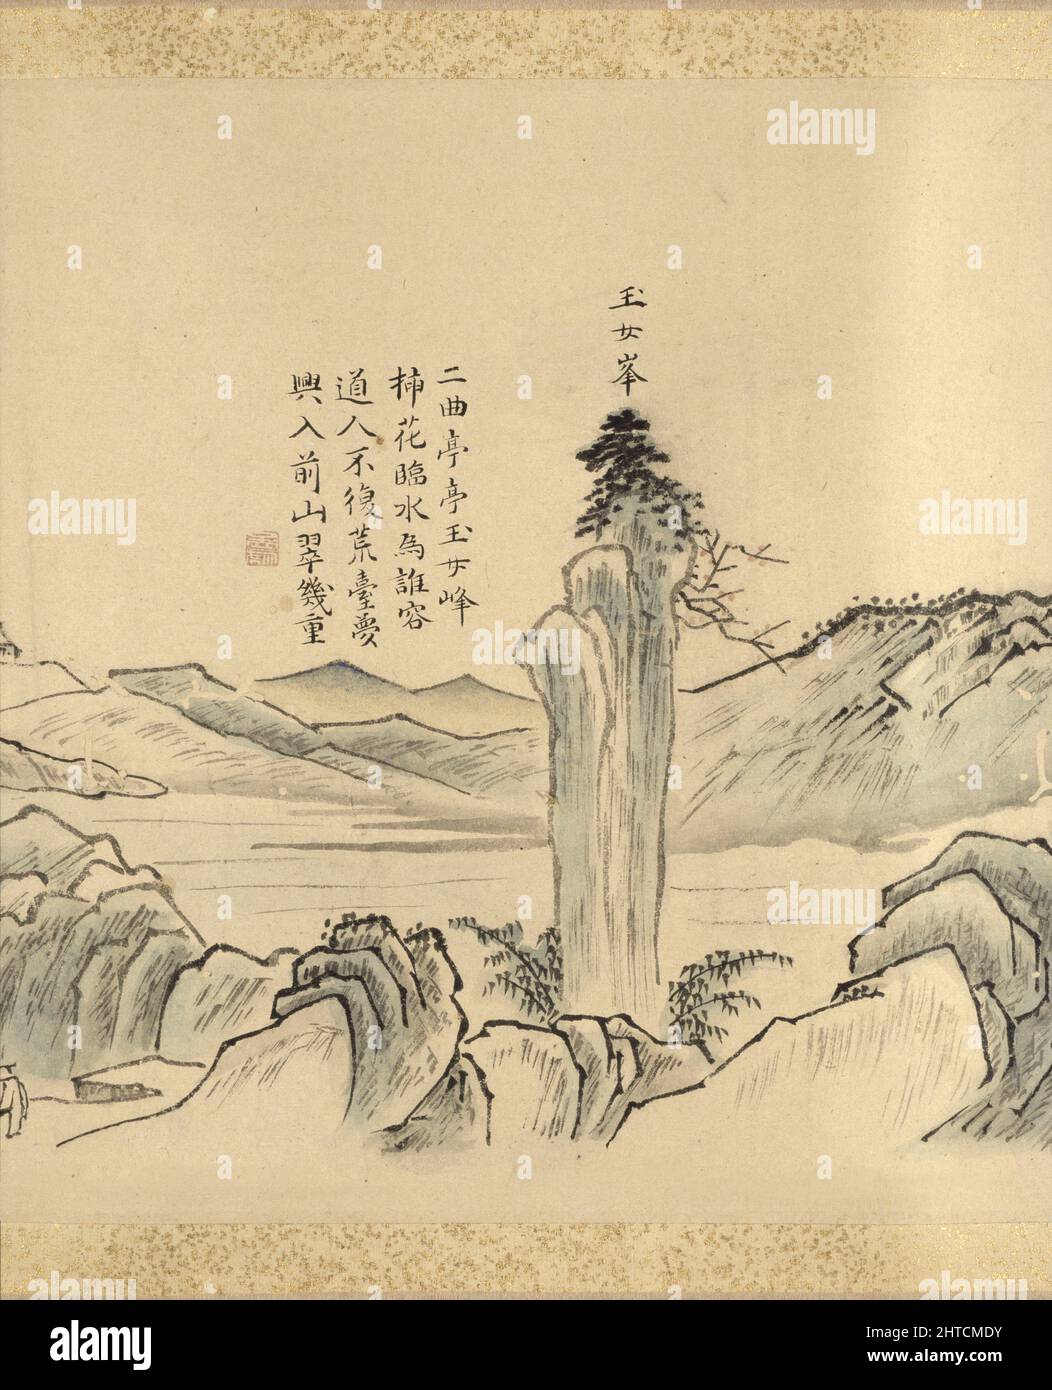 Nine bends of the Jiuquxi River in the Wuyi mountains, 1772. Dimensions: 22.9 x 577.4 cm (height x width) ; 27.5 cm along roller (length) ; 26 cm without roller (length) ; 5.4 cm (diameter). Stock Photo